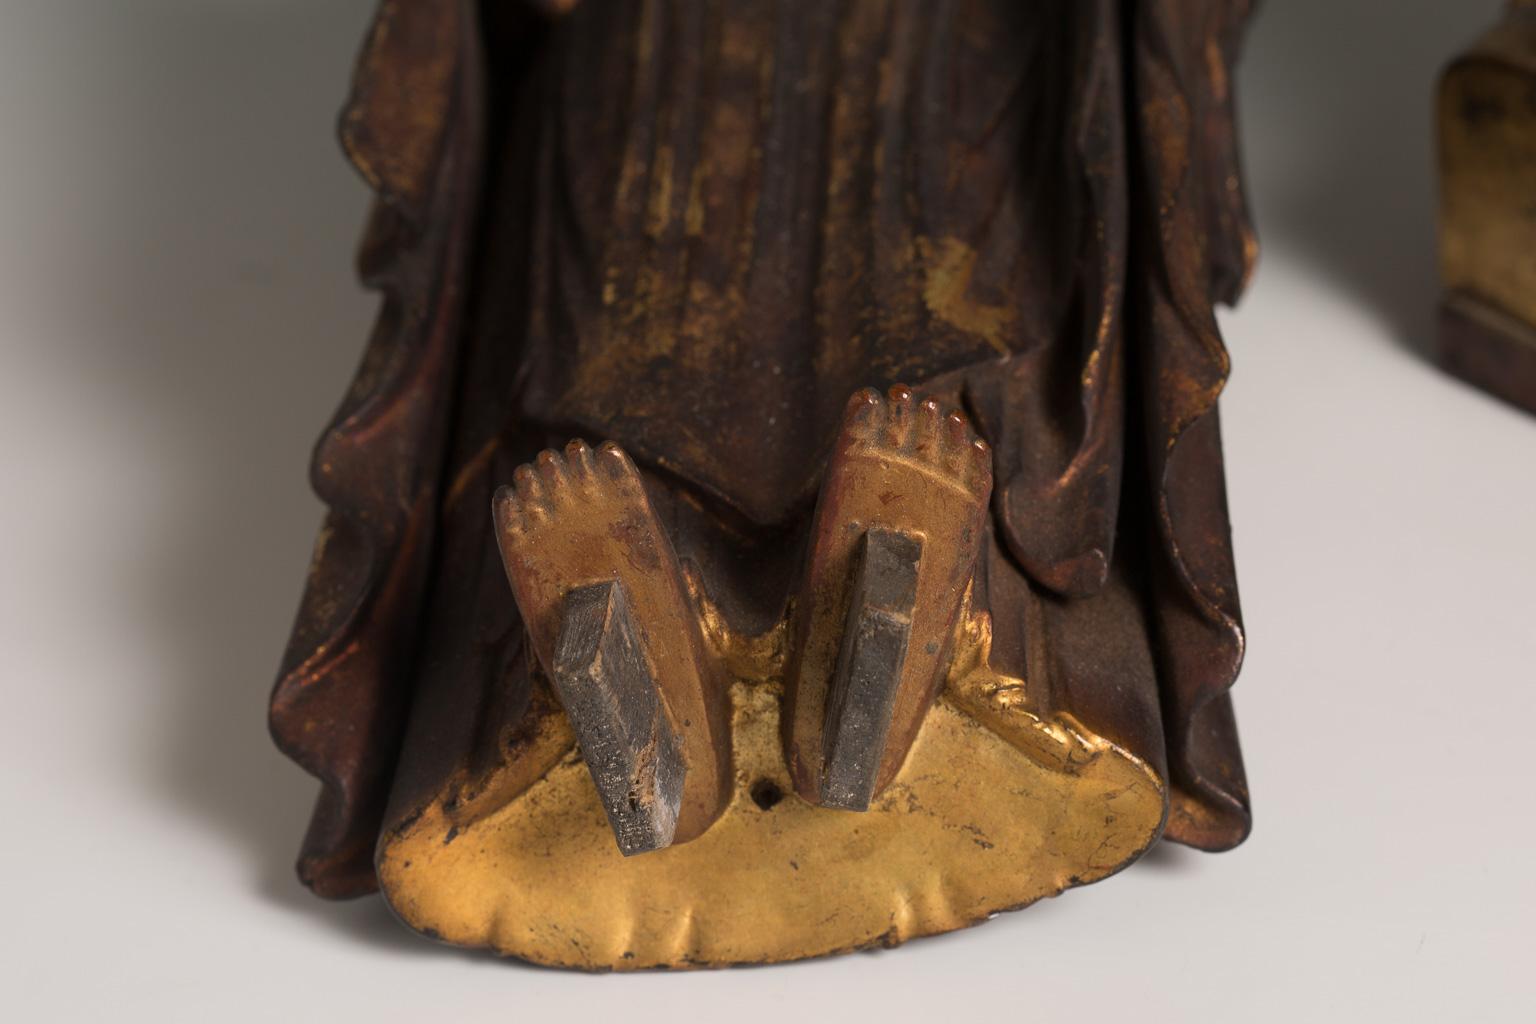 The Amitabha (Amida in Japanese) Buddha is shown standing with his hands forming the Amida raigo-in mudra. The face has a serene expression, with closed eyes under delicately arched brows and a severe face. The hair is arranged in rows of coils that